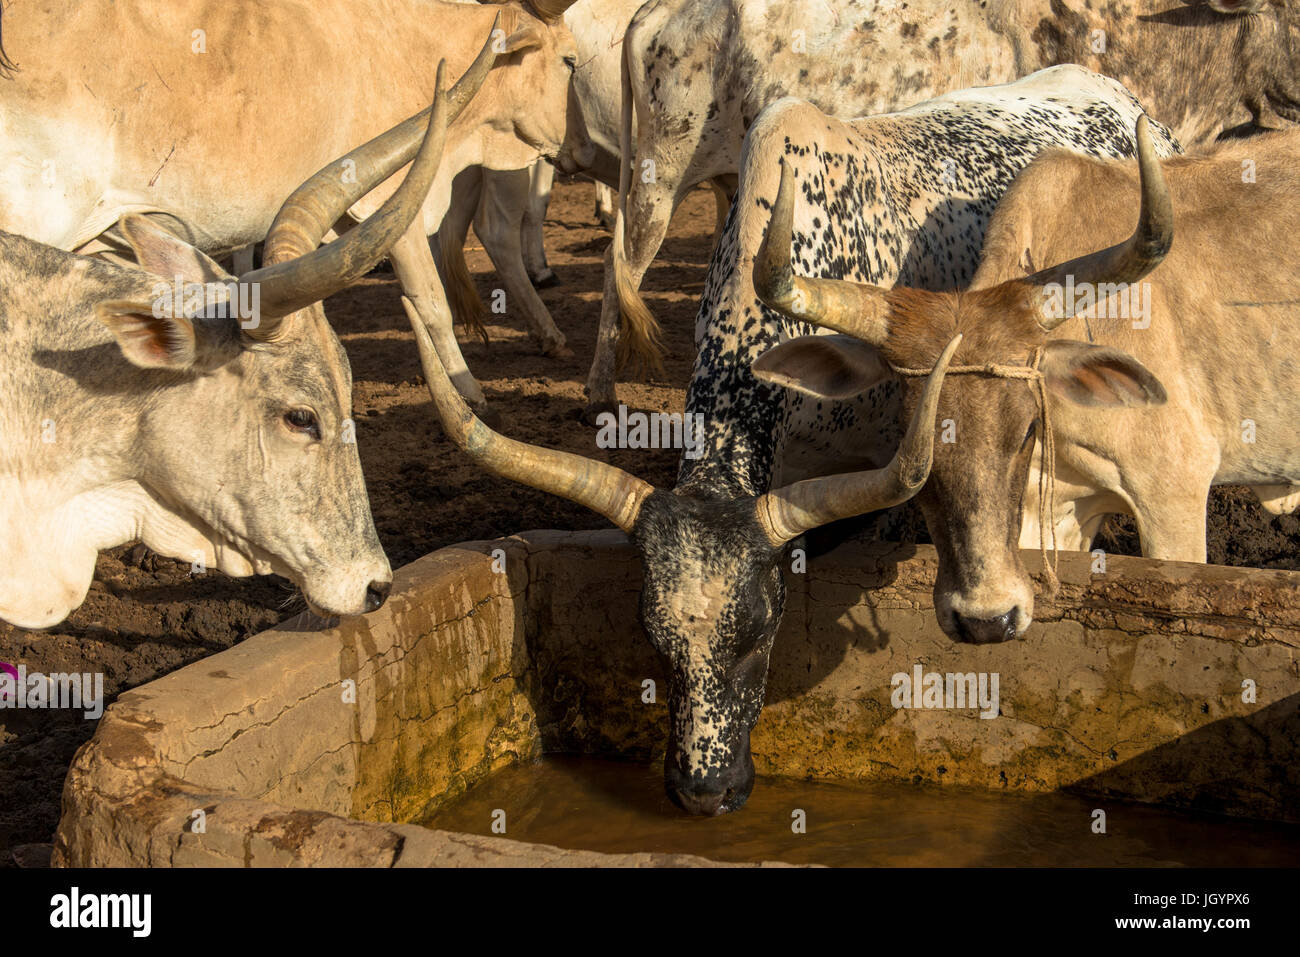 Cattle drinking water. Senegal. Stock Photo